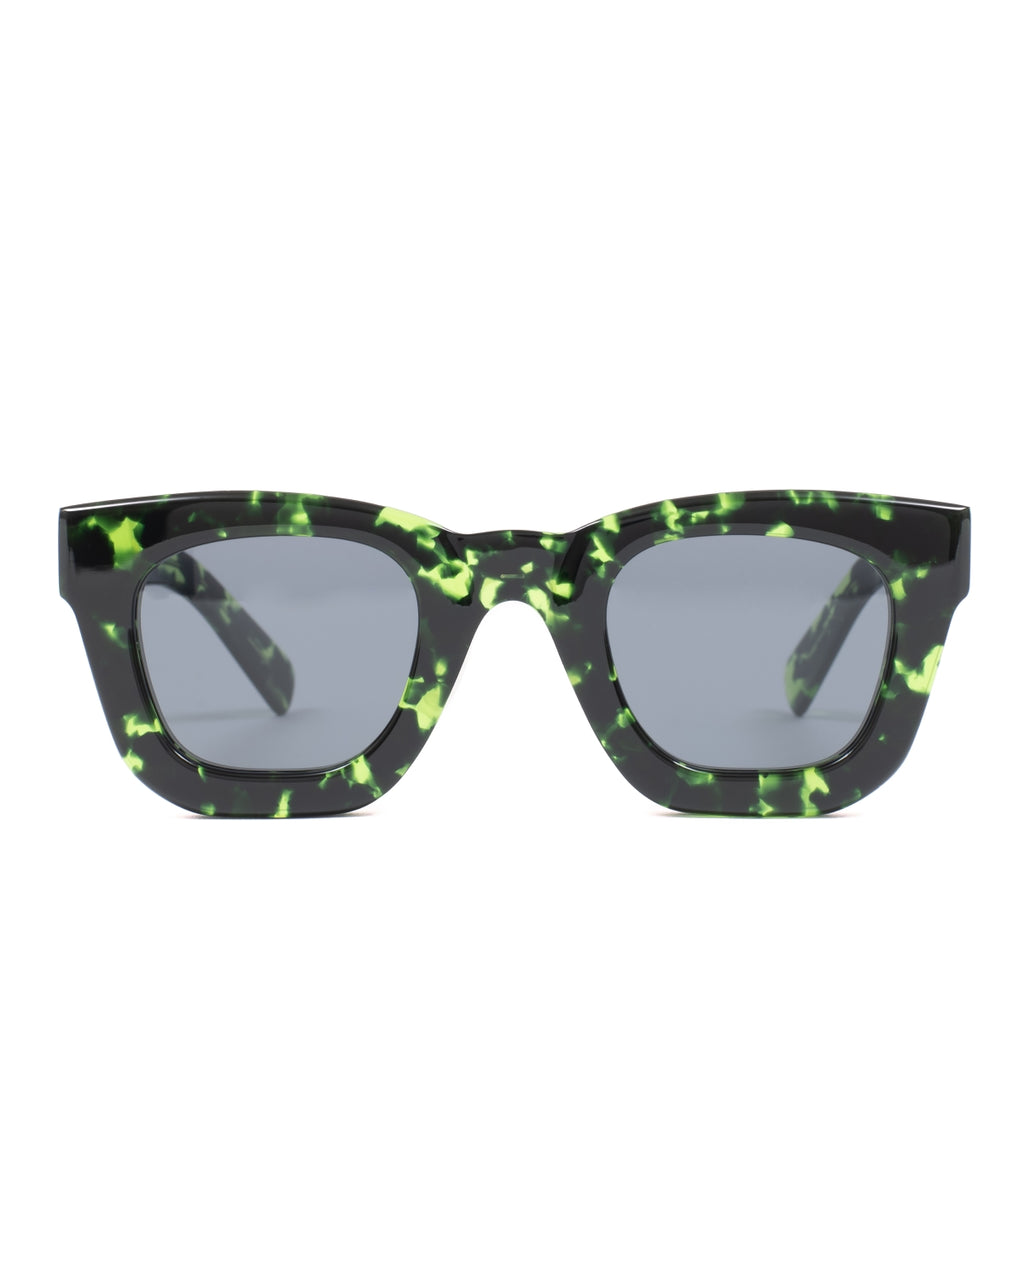 Free: AESTHETIC GRUNGE, black framed hippie sunglasses with green